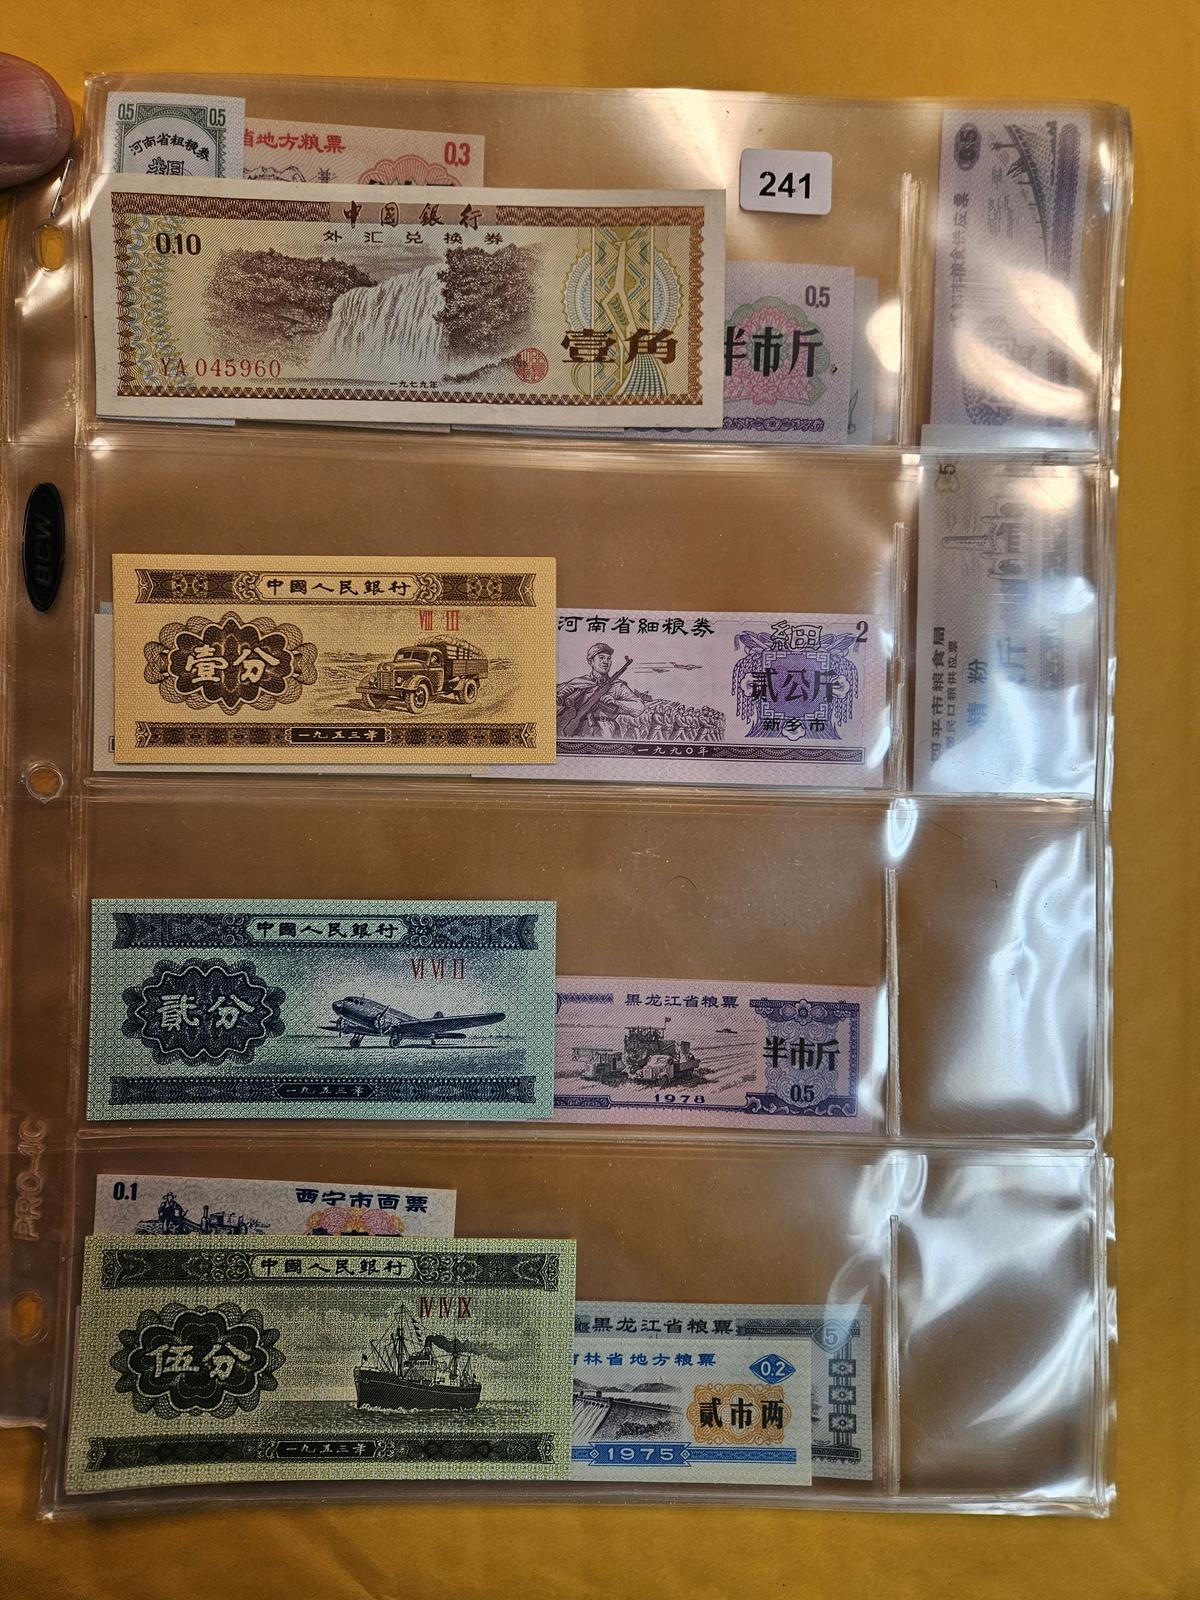 Very nice group of uncirculated Asian notes